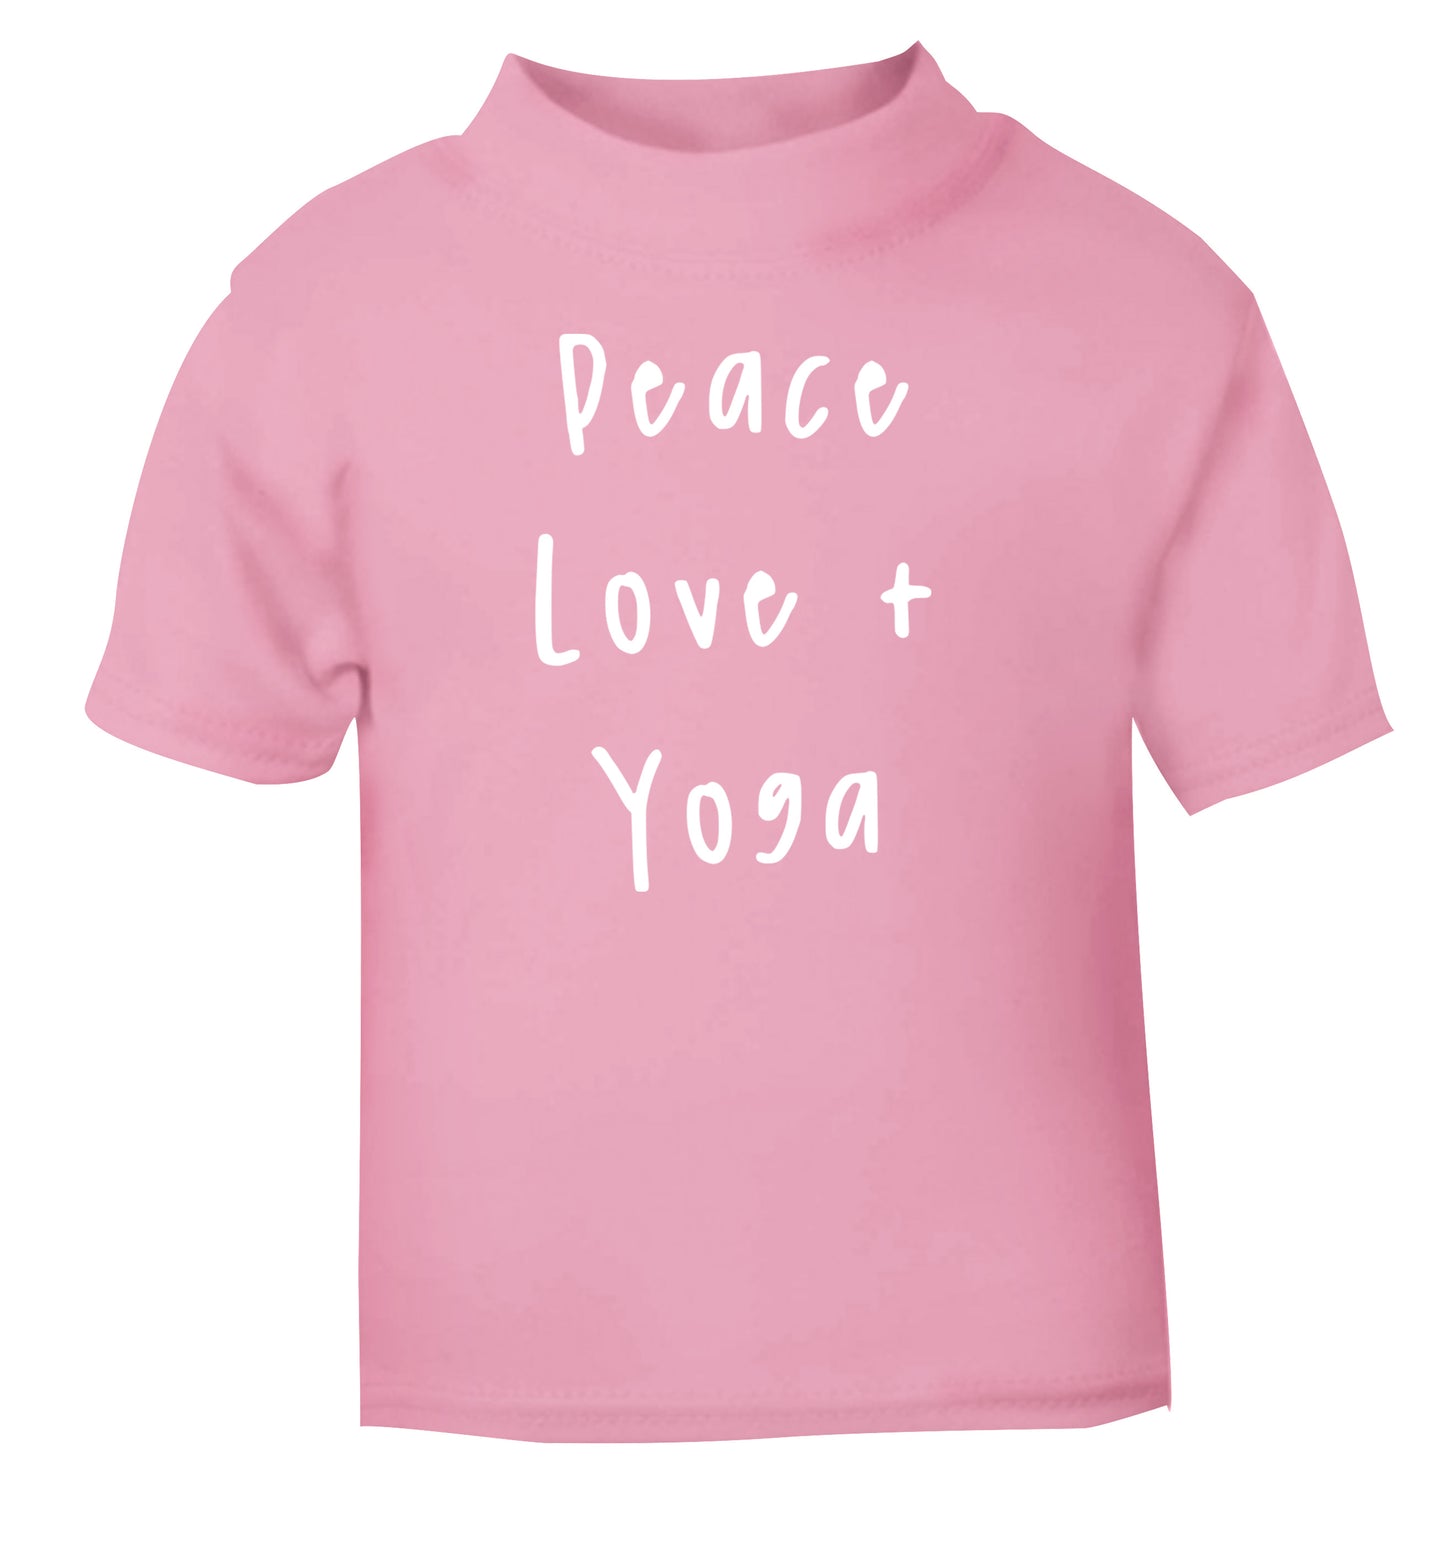 Peace love and yoga light pink Baby Toddler Tshirt 2 Years